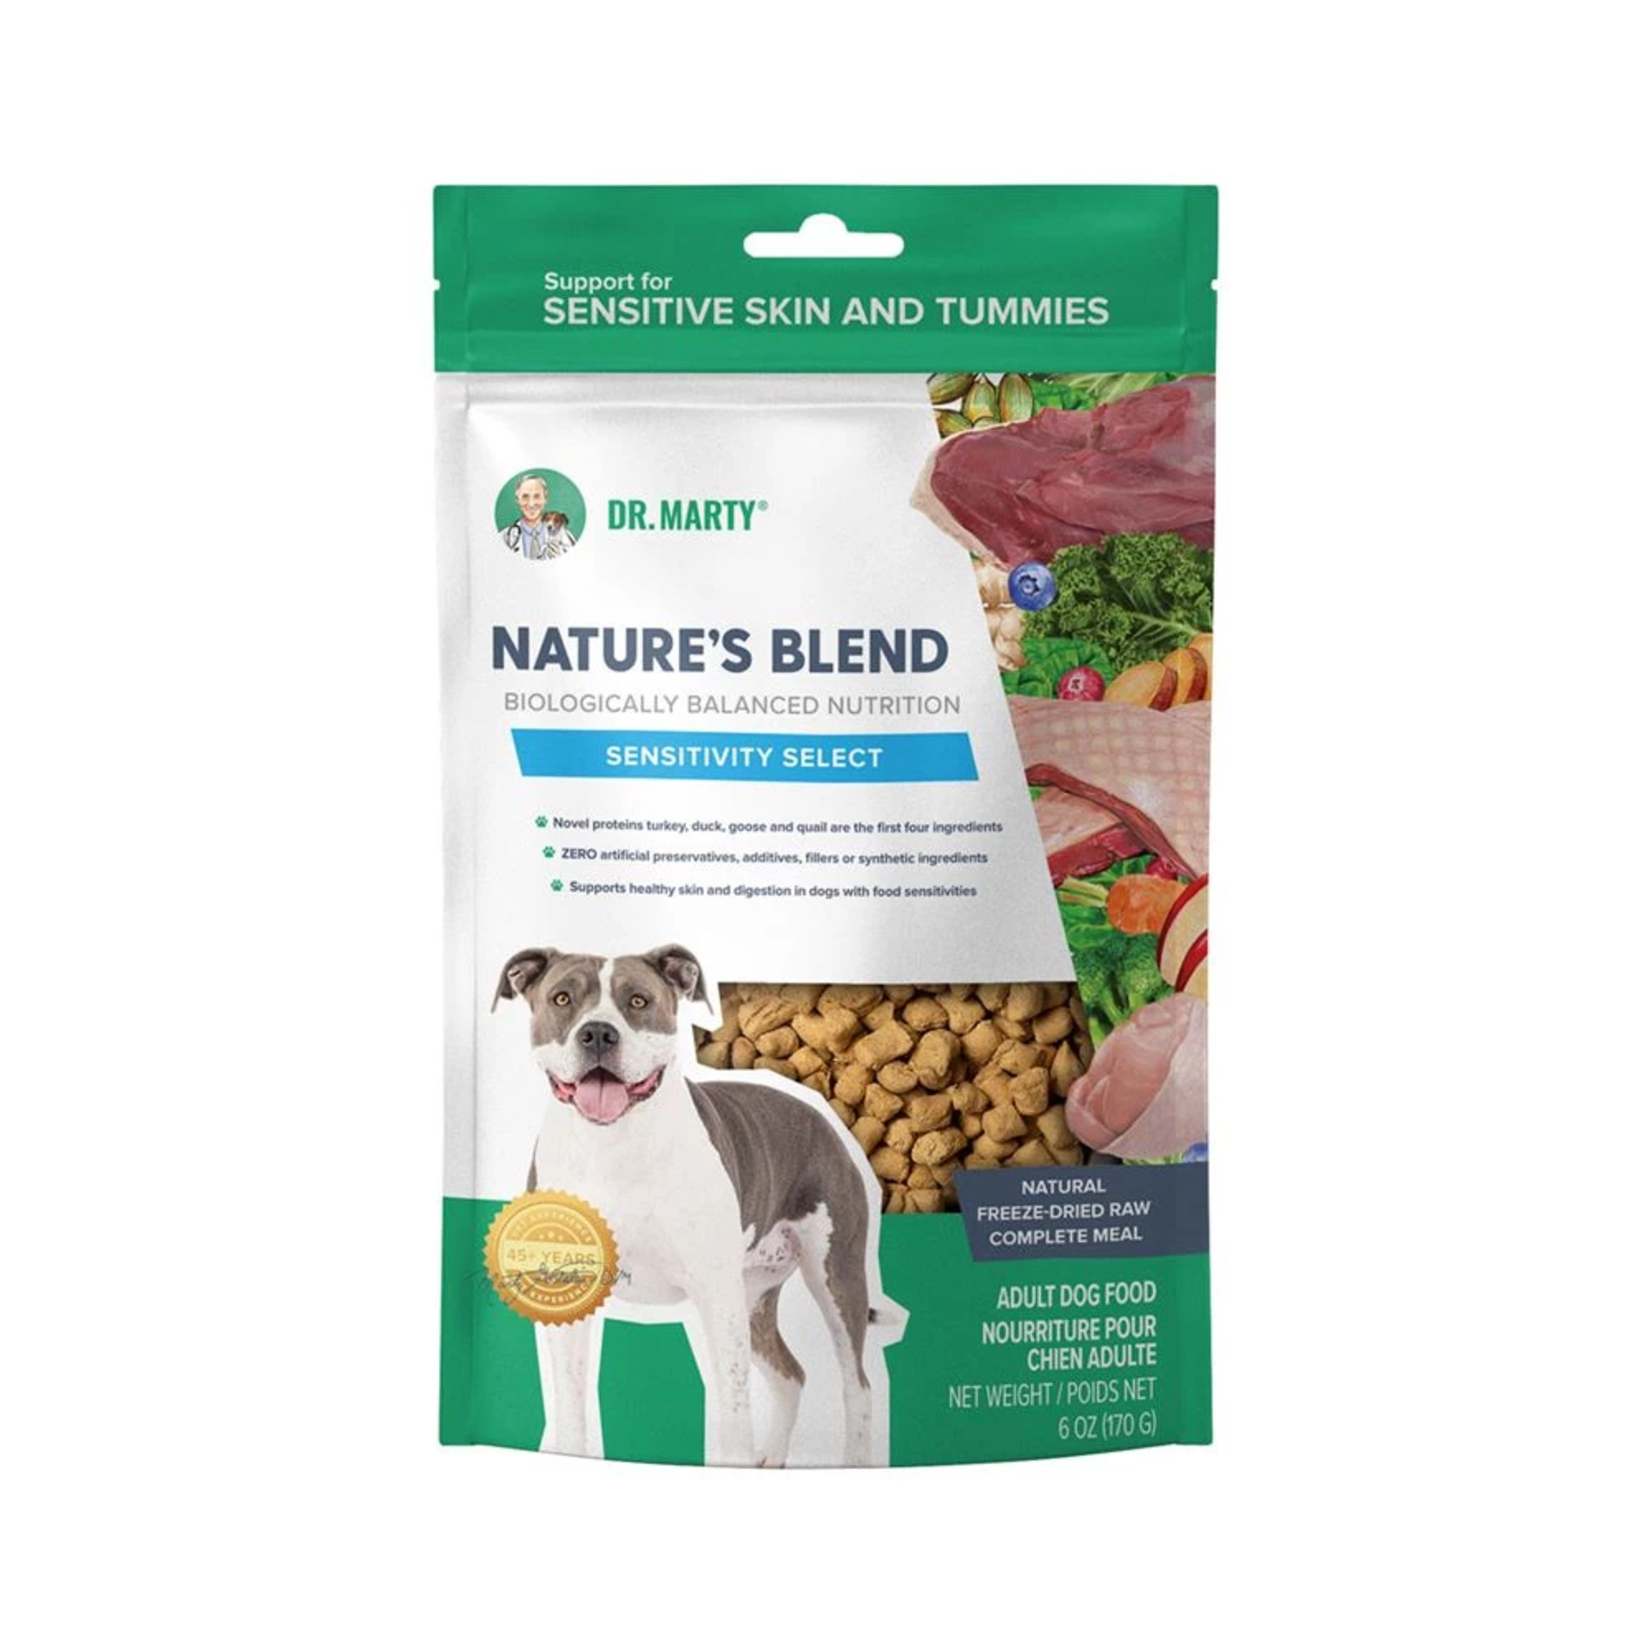 Dr. Marty Dr. Marty Nature's Blend - Freeze-Dried Raw Sensitivity Select Dog Food